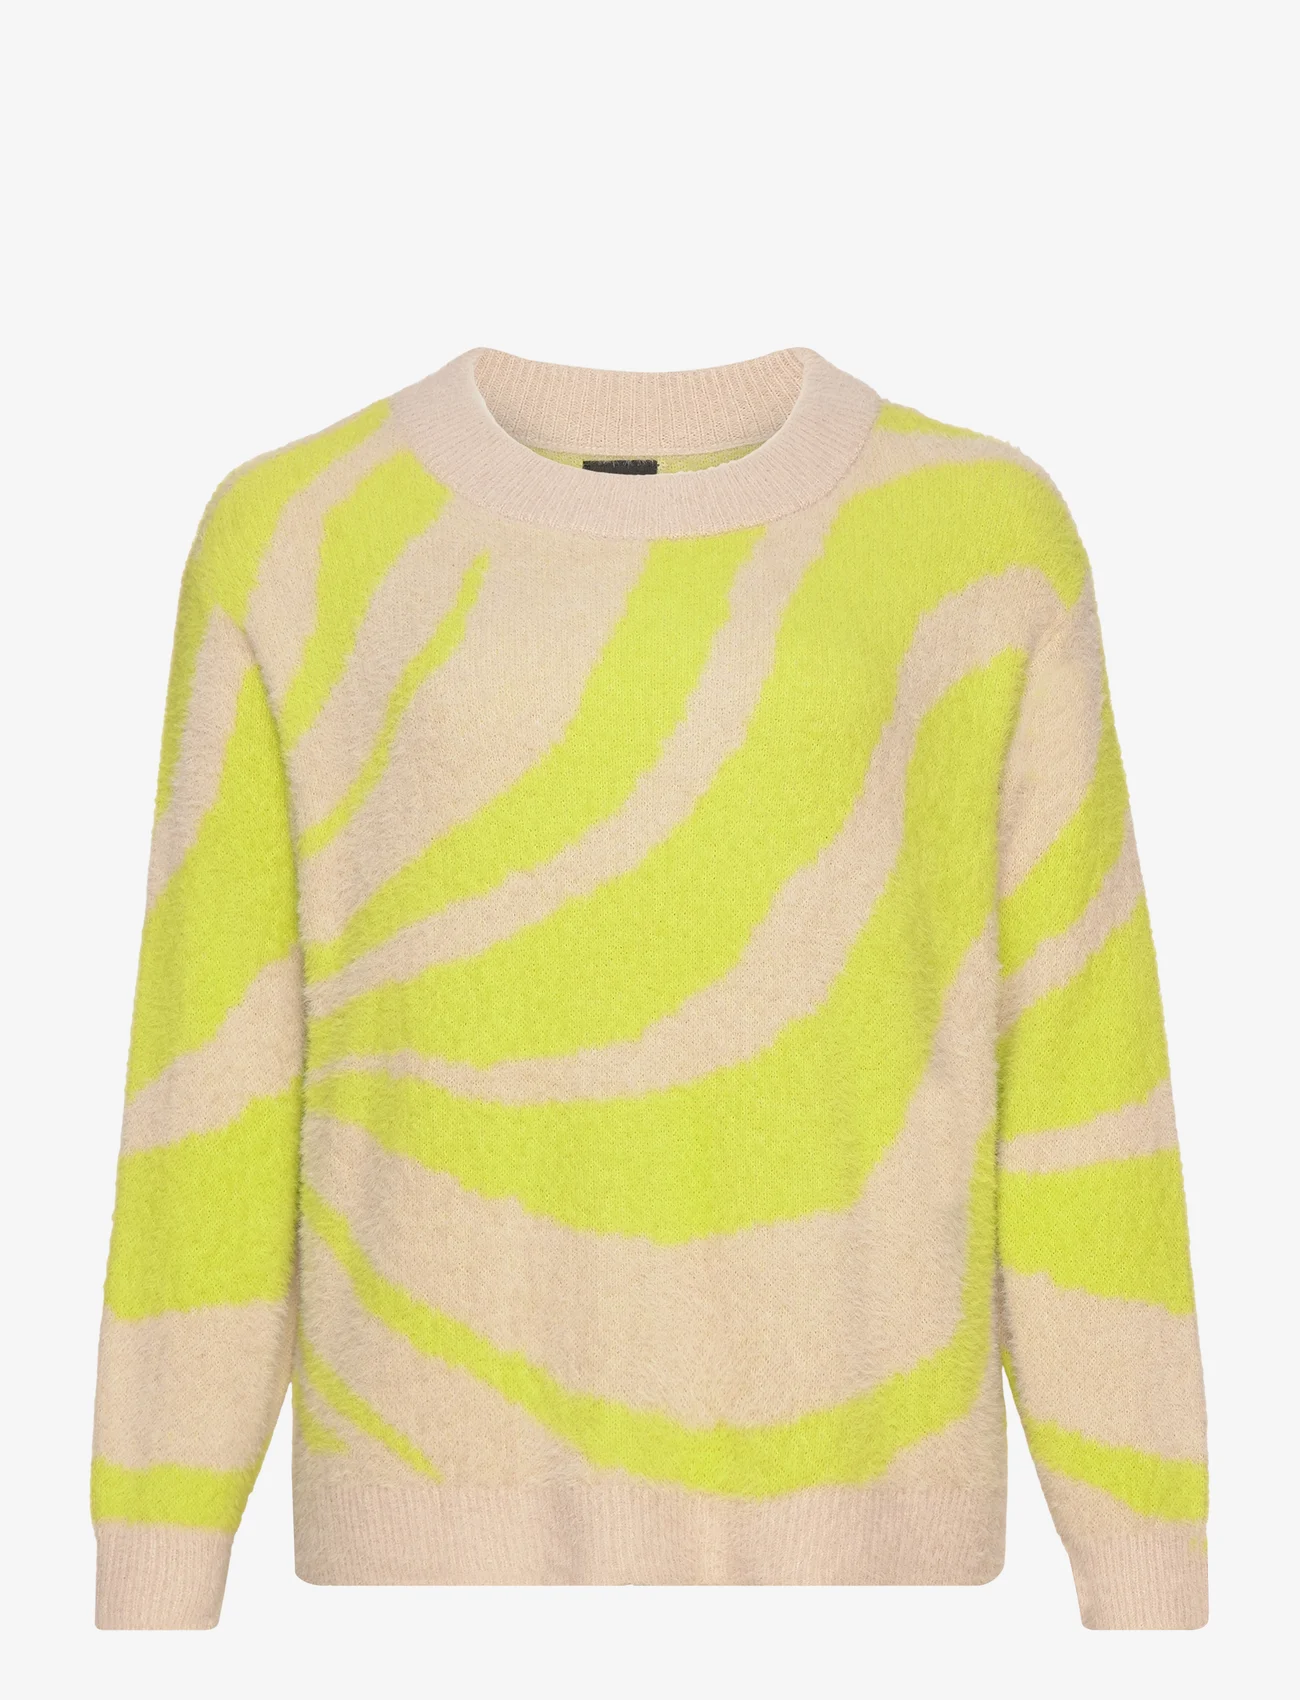 Zizzi - MBOI, L/S, PULLOVER - jumpers - green - 0